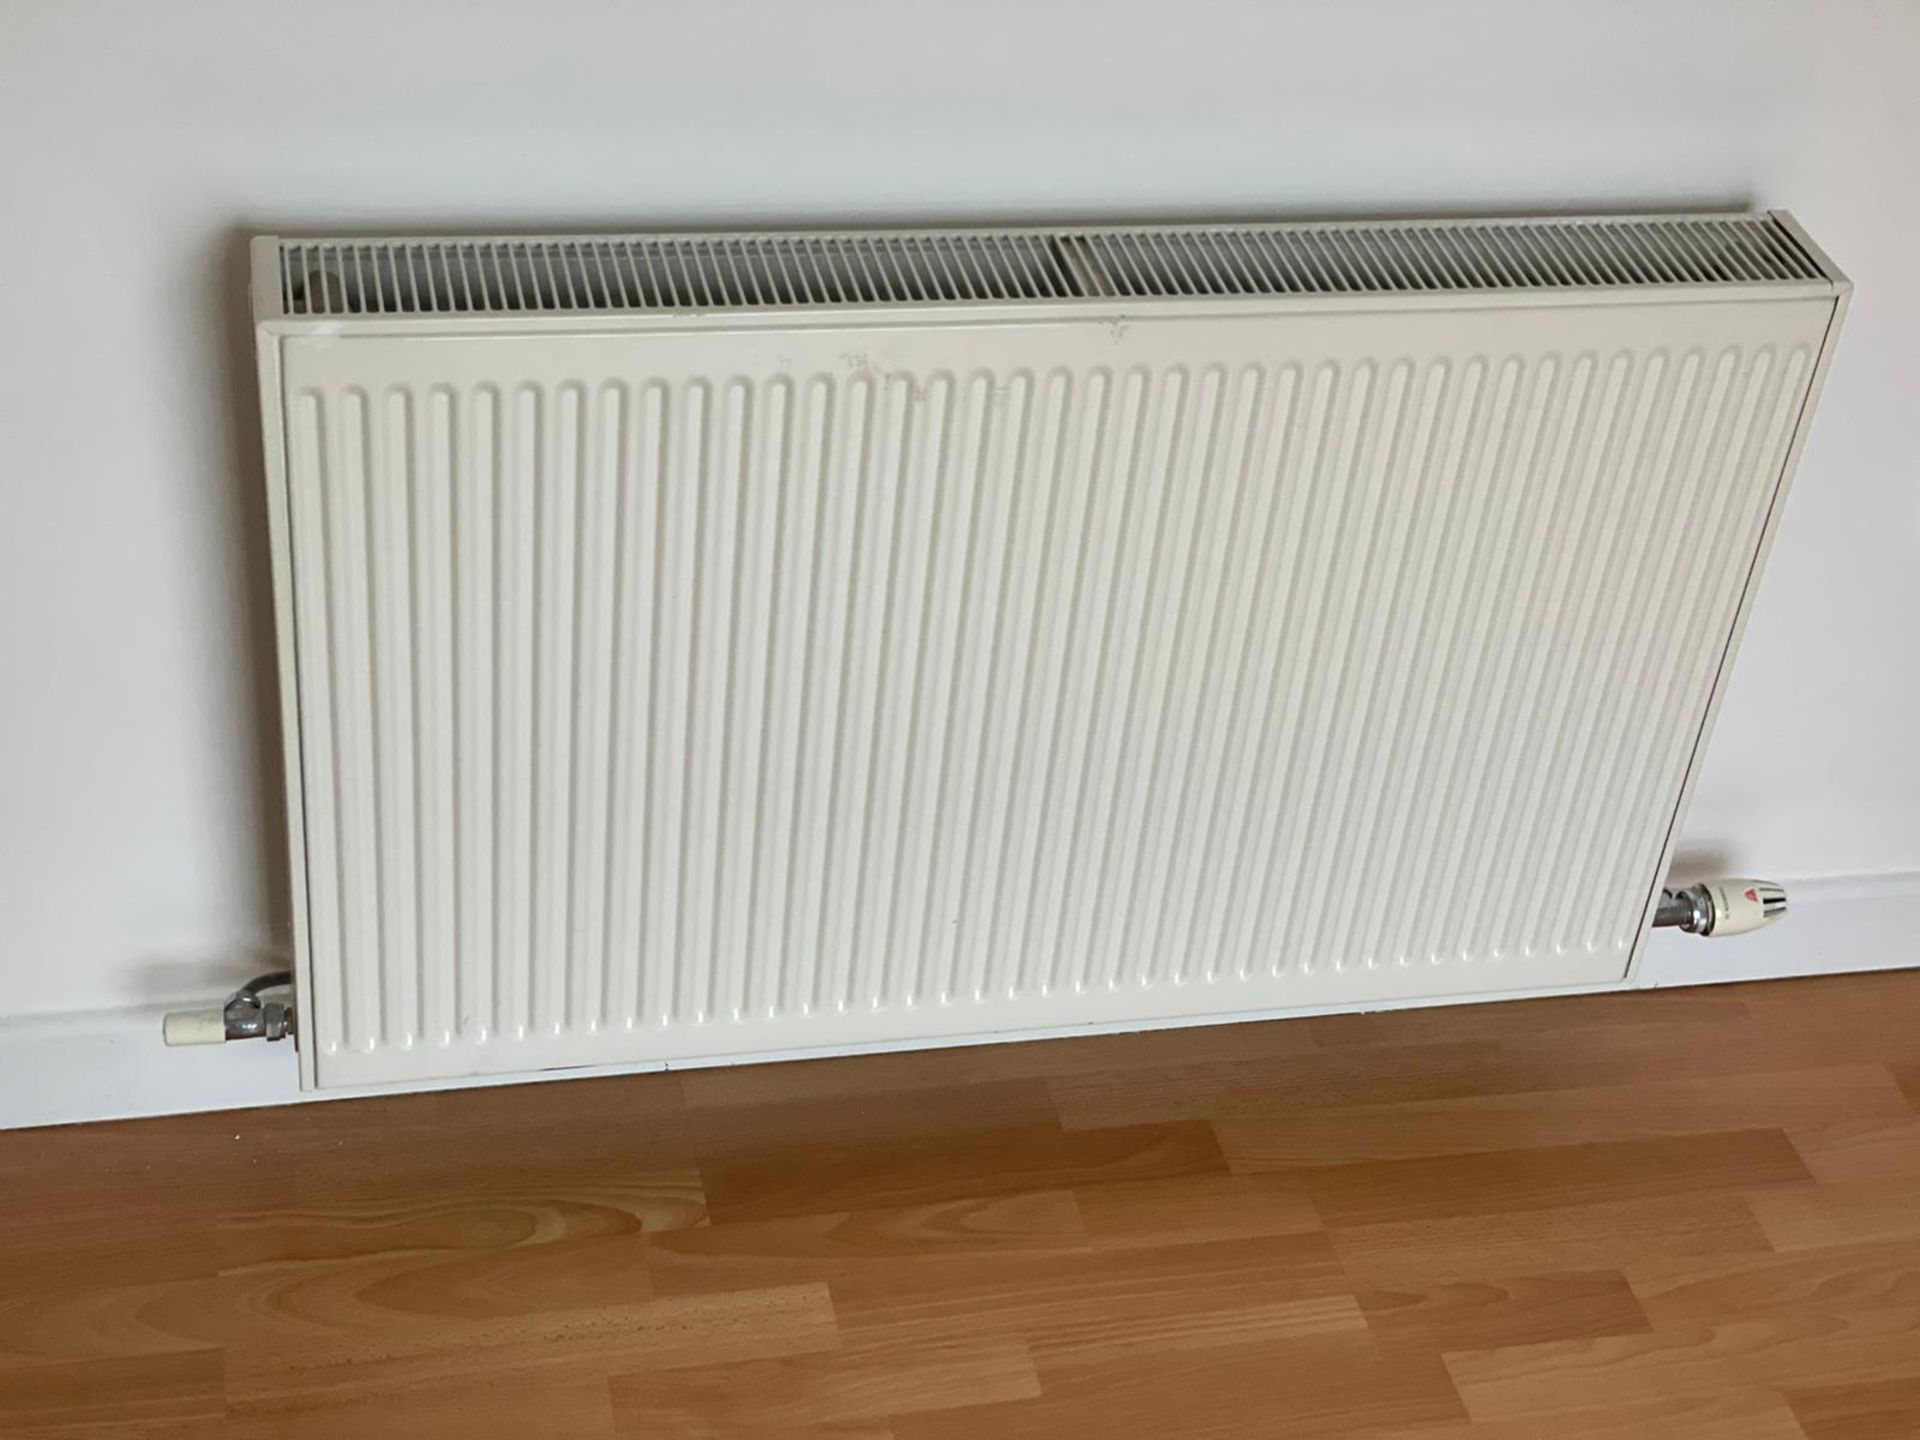 10 x Central Heating Radiators - To Be Removed From An Executive Office Environment - CL681 - Ref: - Image 2 of 4